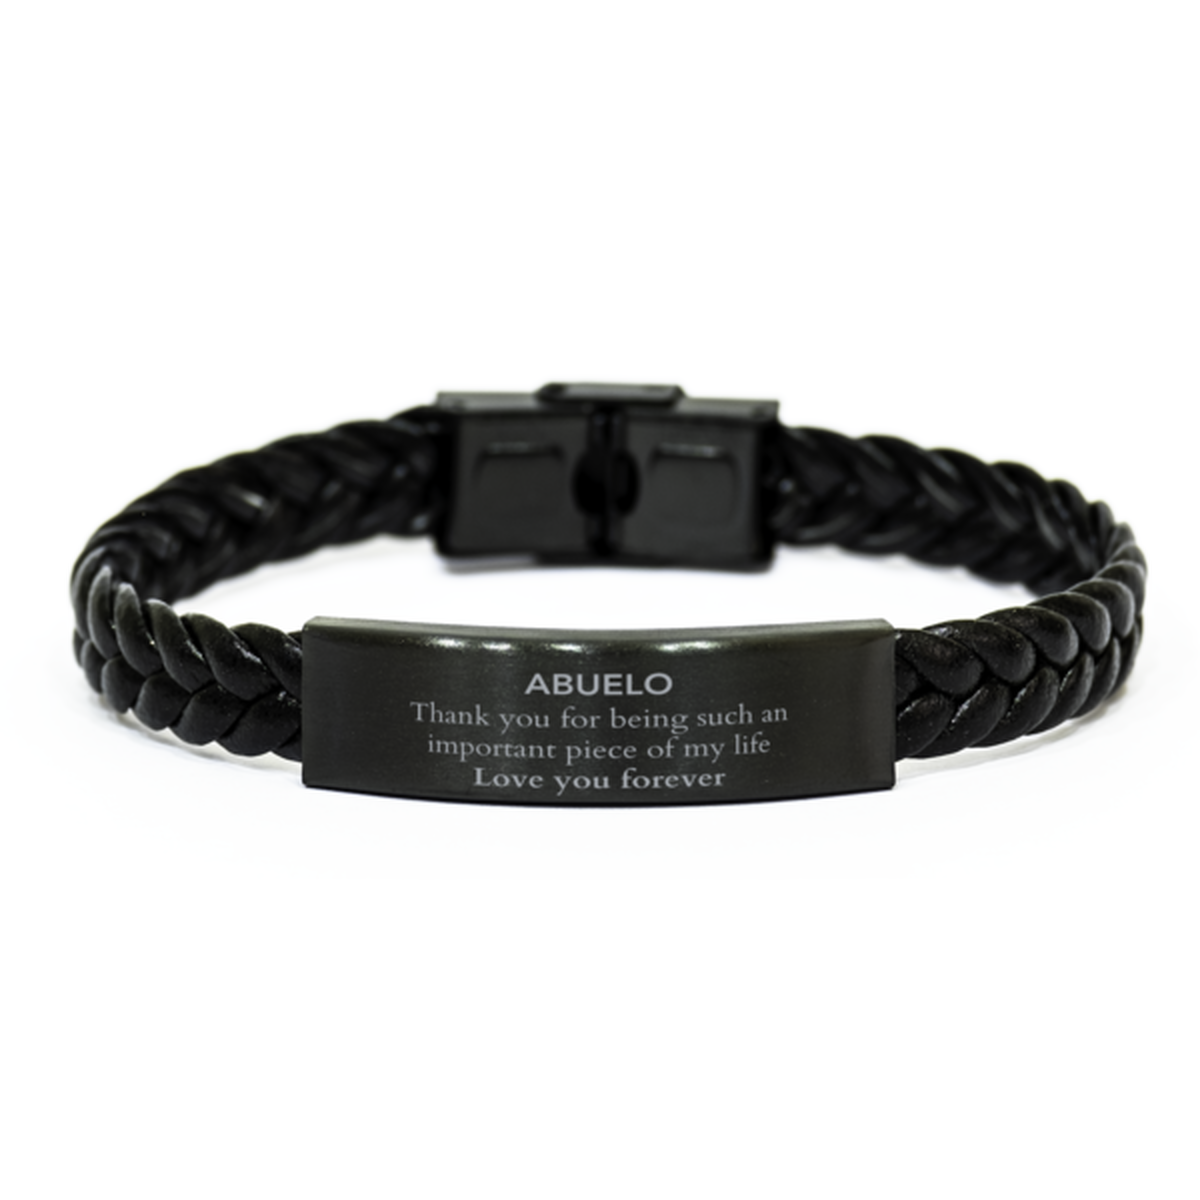 Appropriate Abuelo Braided Leather Bracelet Epic Birthday Gifts for Abuelo Thank you for being such an important piece of my life Abuelo Christmas Mothers Fathers Day